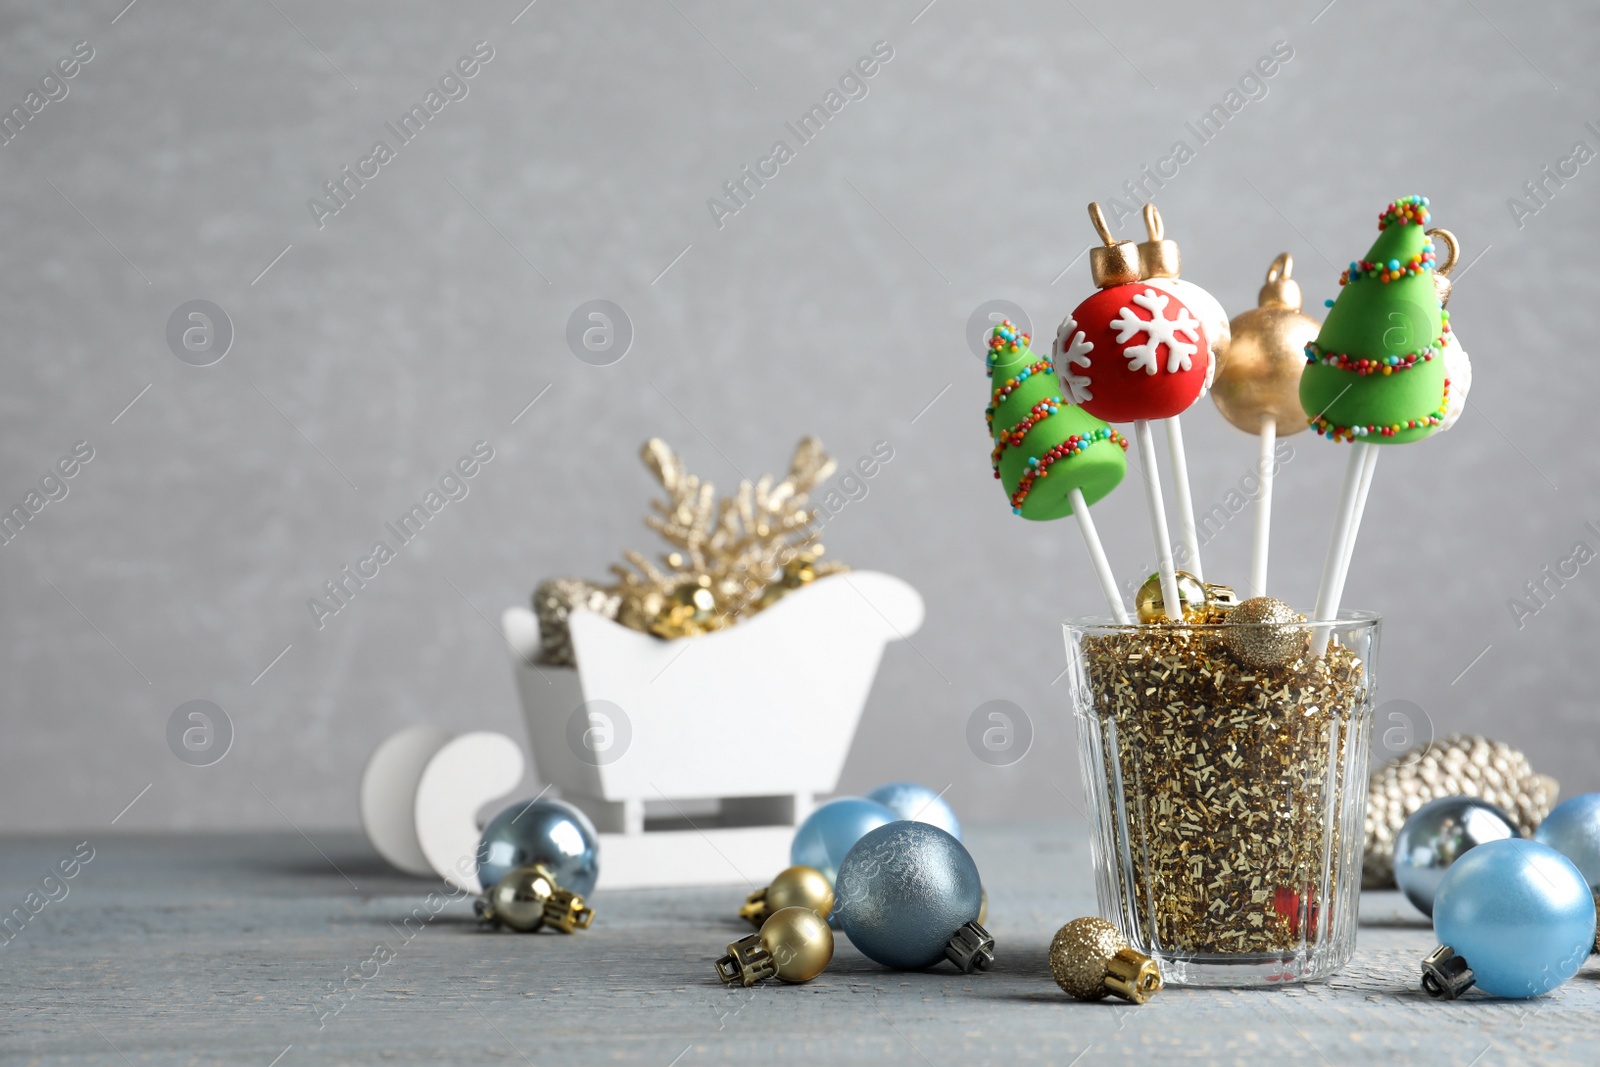 Photo of Delicious Christmas themed cake pops and festive decor on wooden table against grey background. Space for text